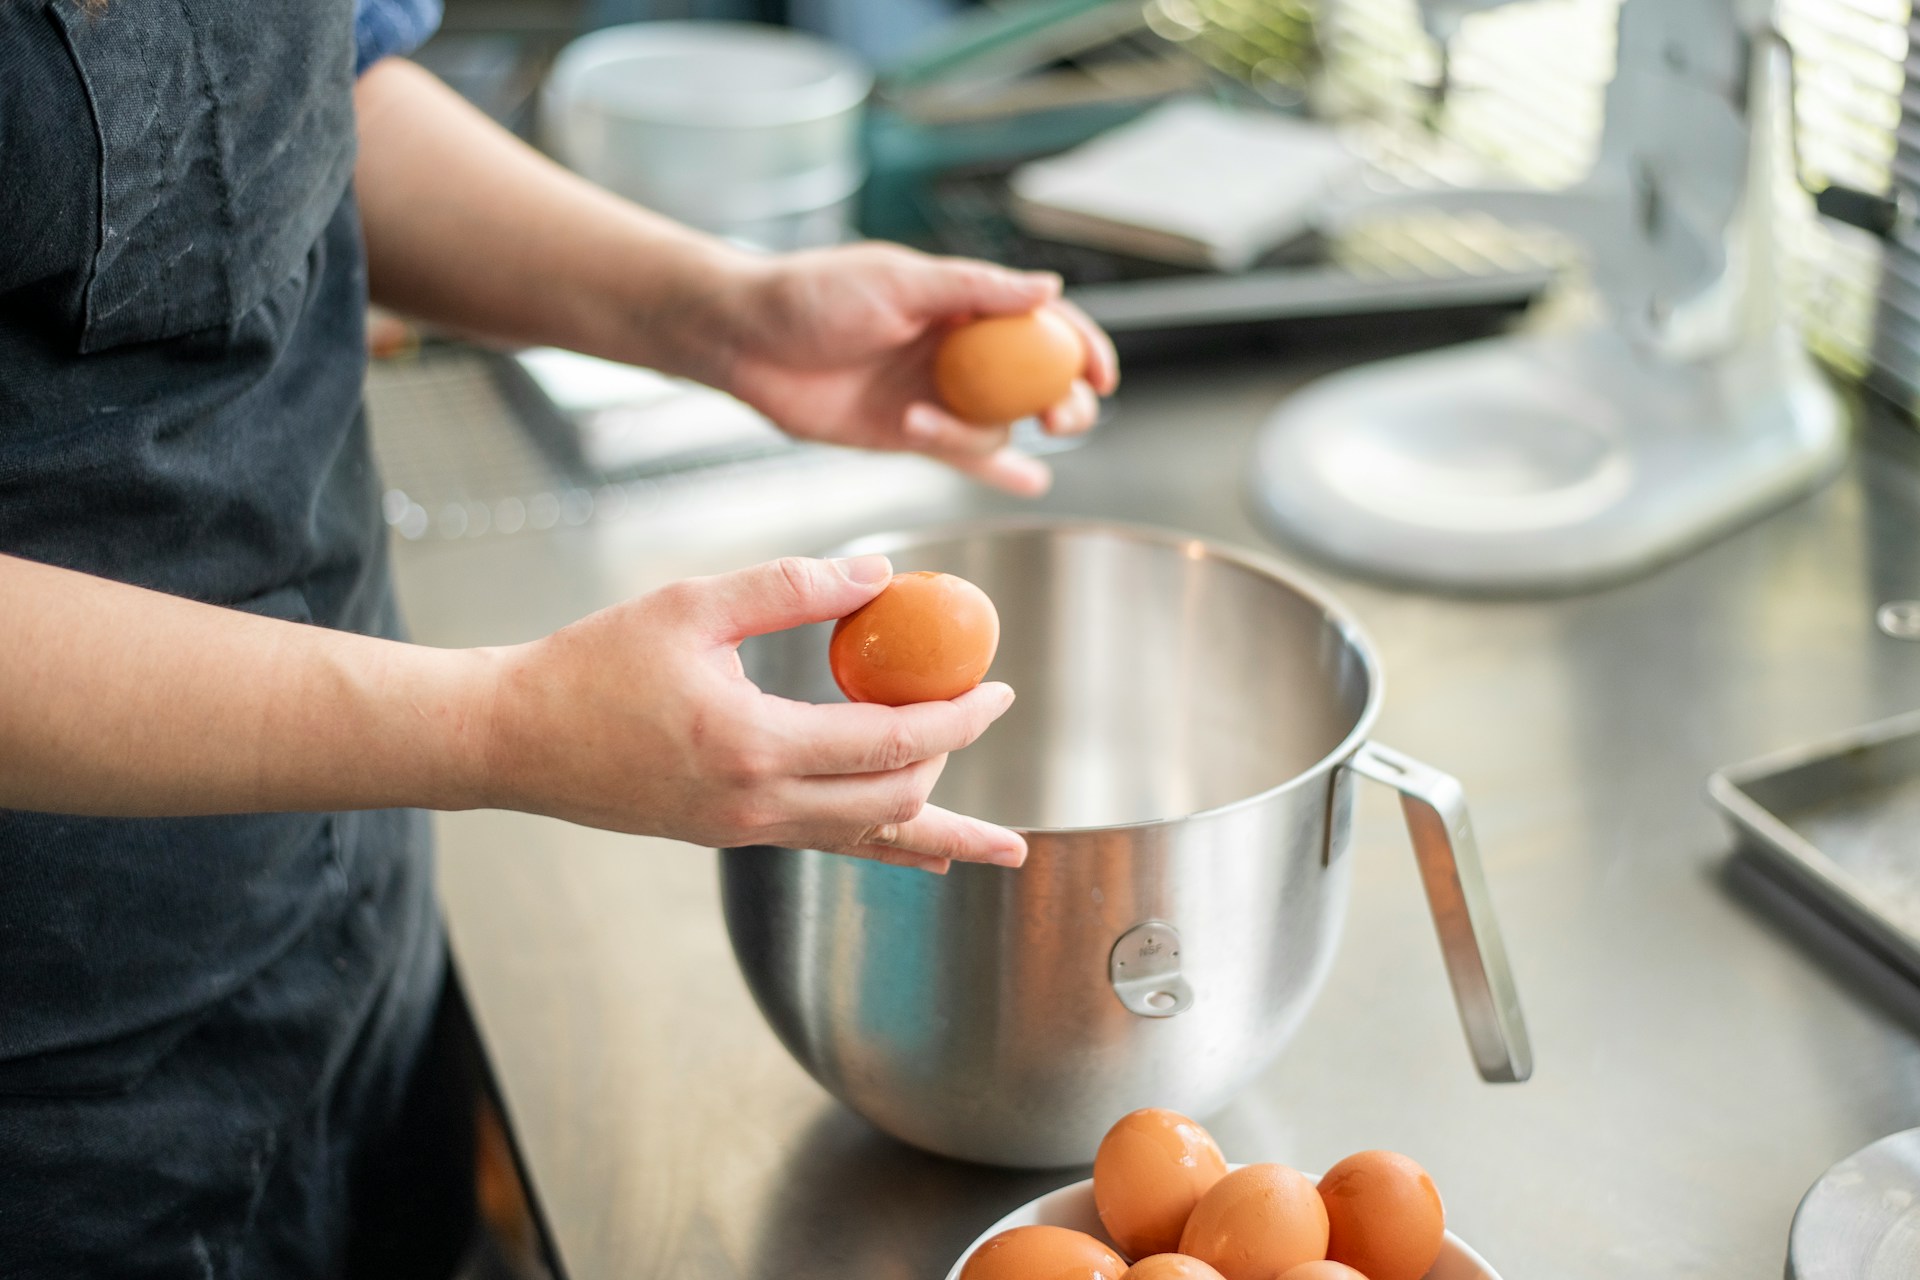 Cooking Confidence Boost: Essential Tips for Home Chefs